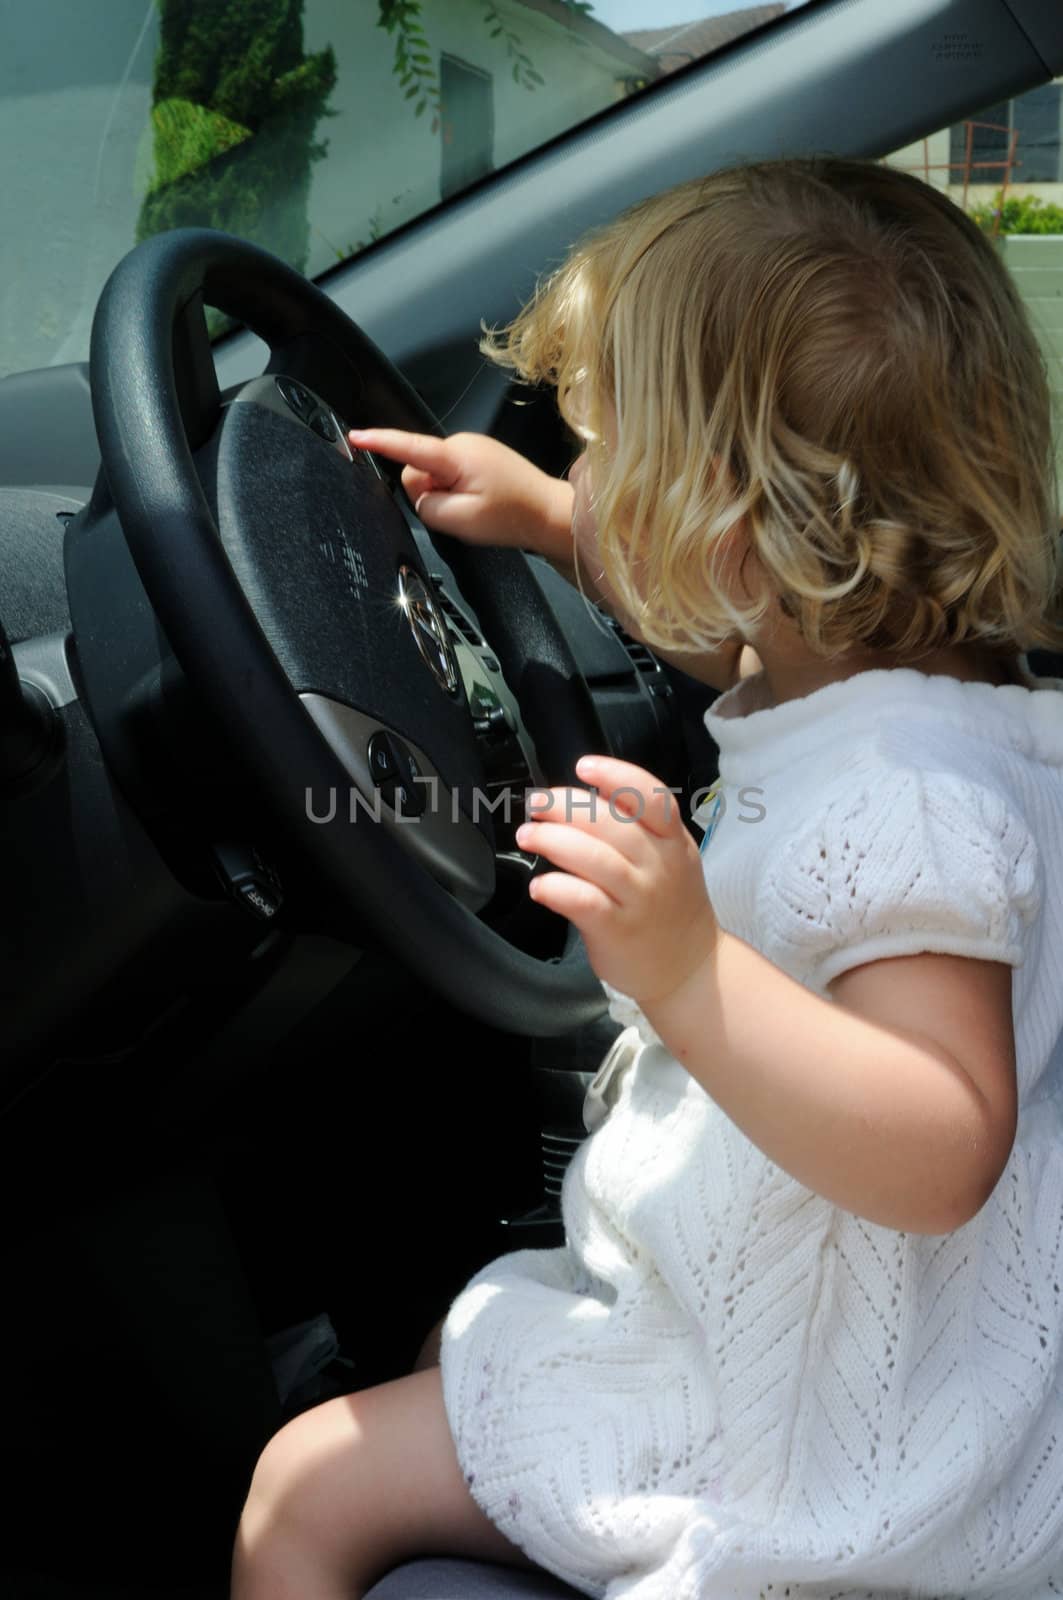 Little girl sits in a car and plays with the steering wheel, pretending to drive.